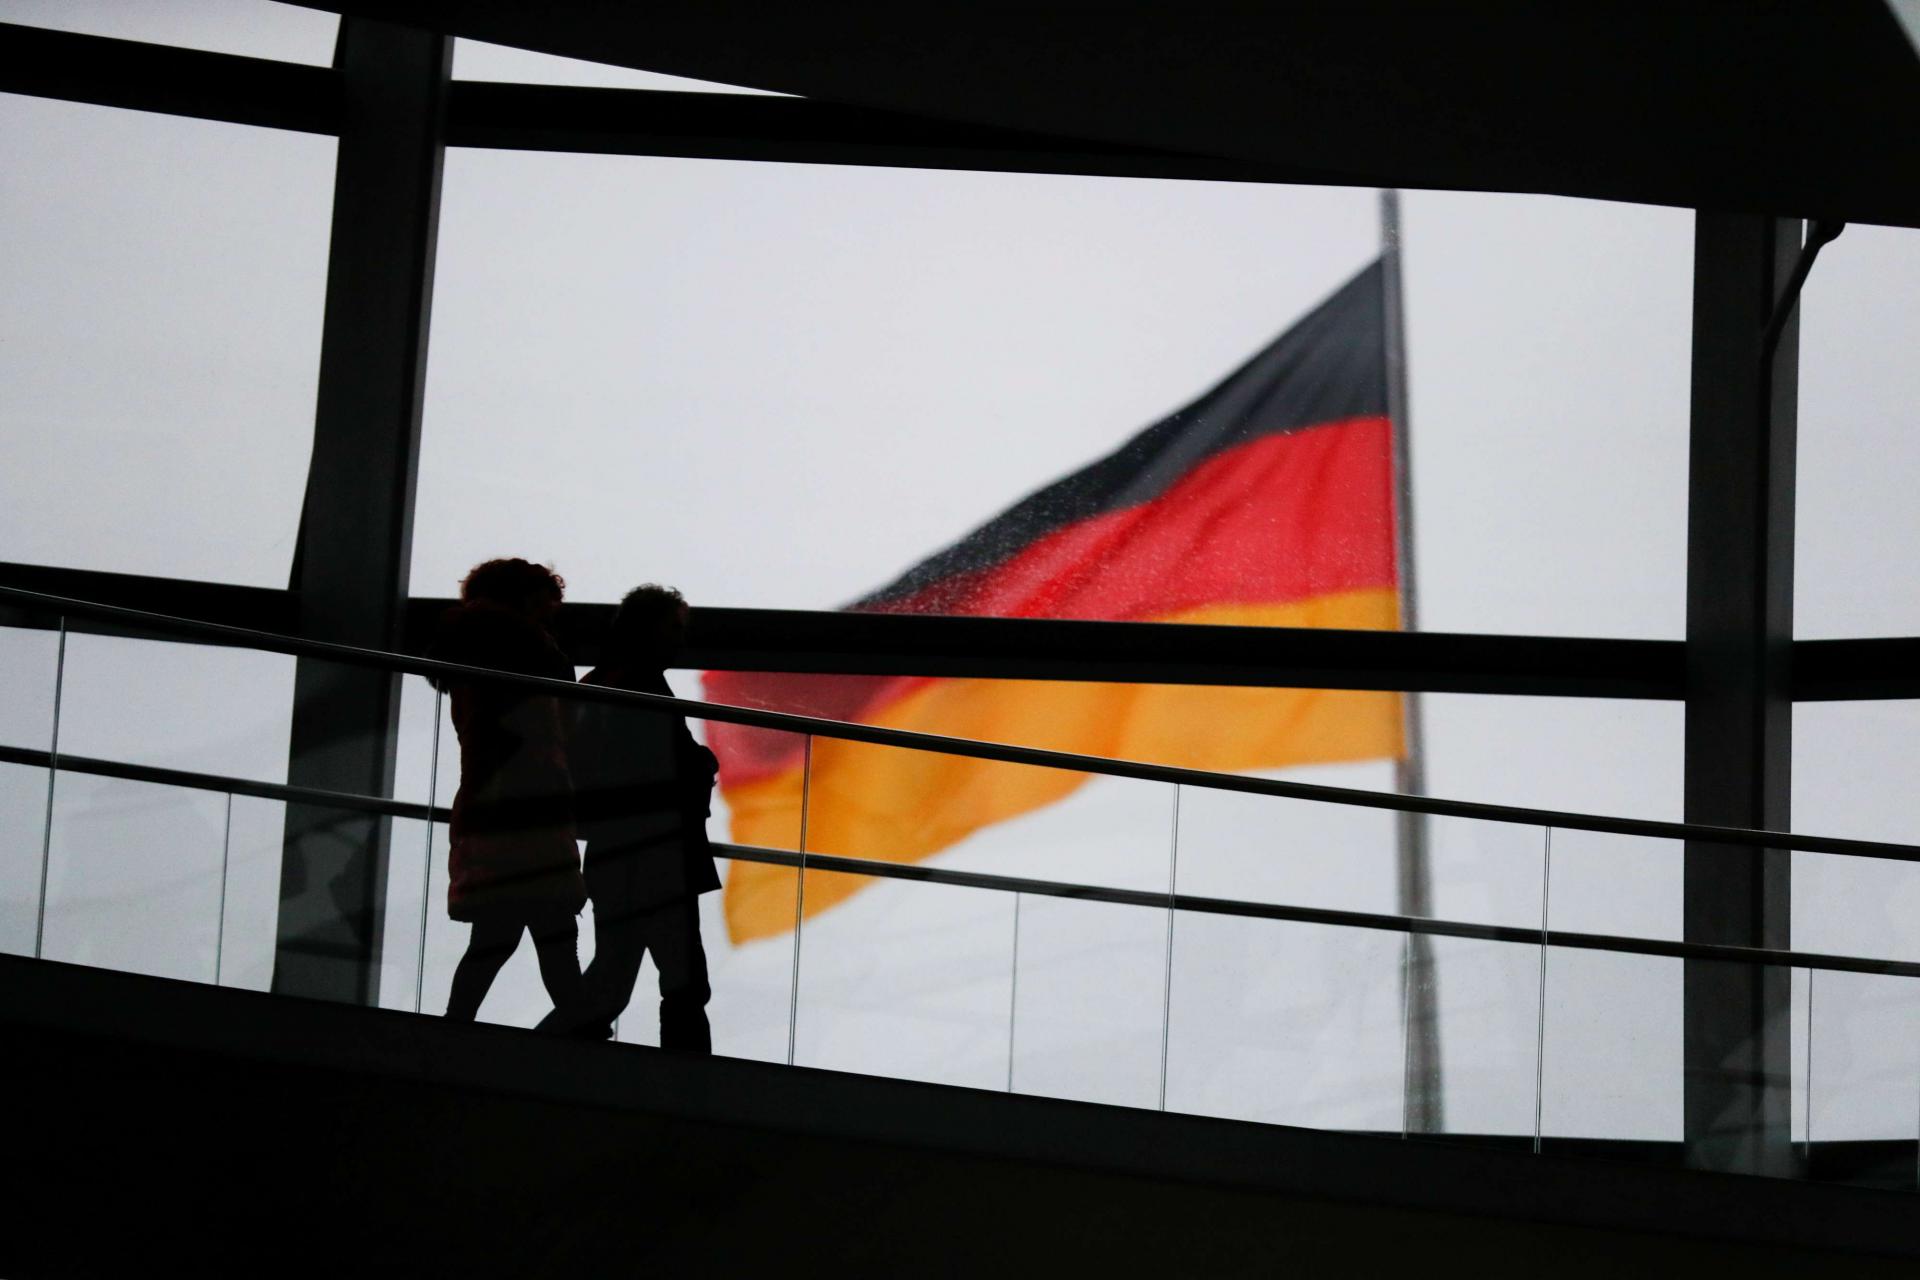 The Bundestag also pledged to reject any financial support for the boycott movement, and to prevent BDS and its partners holding events